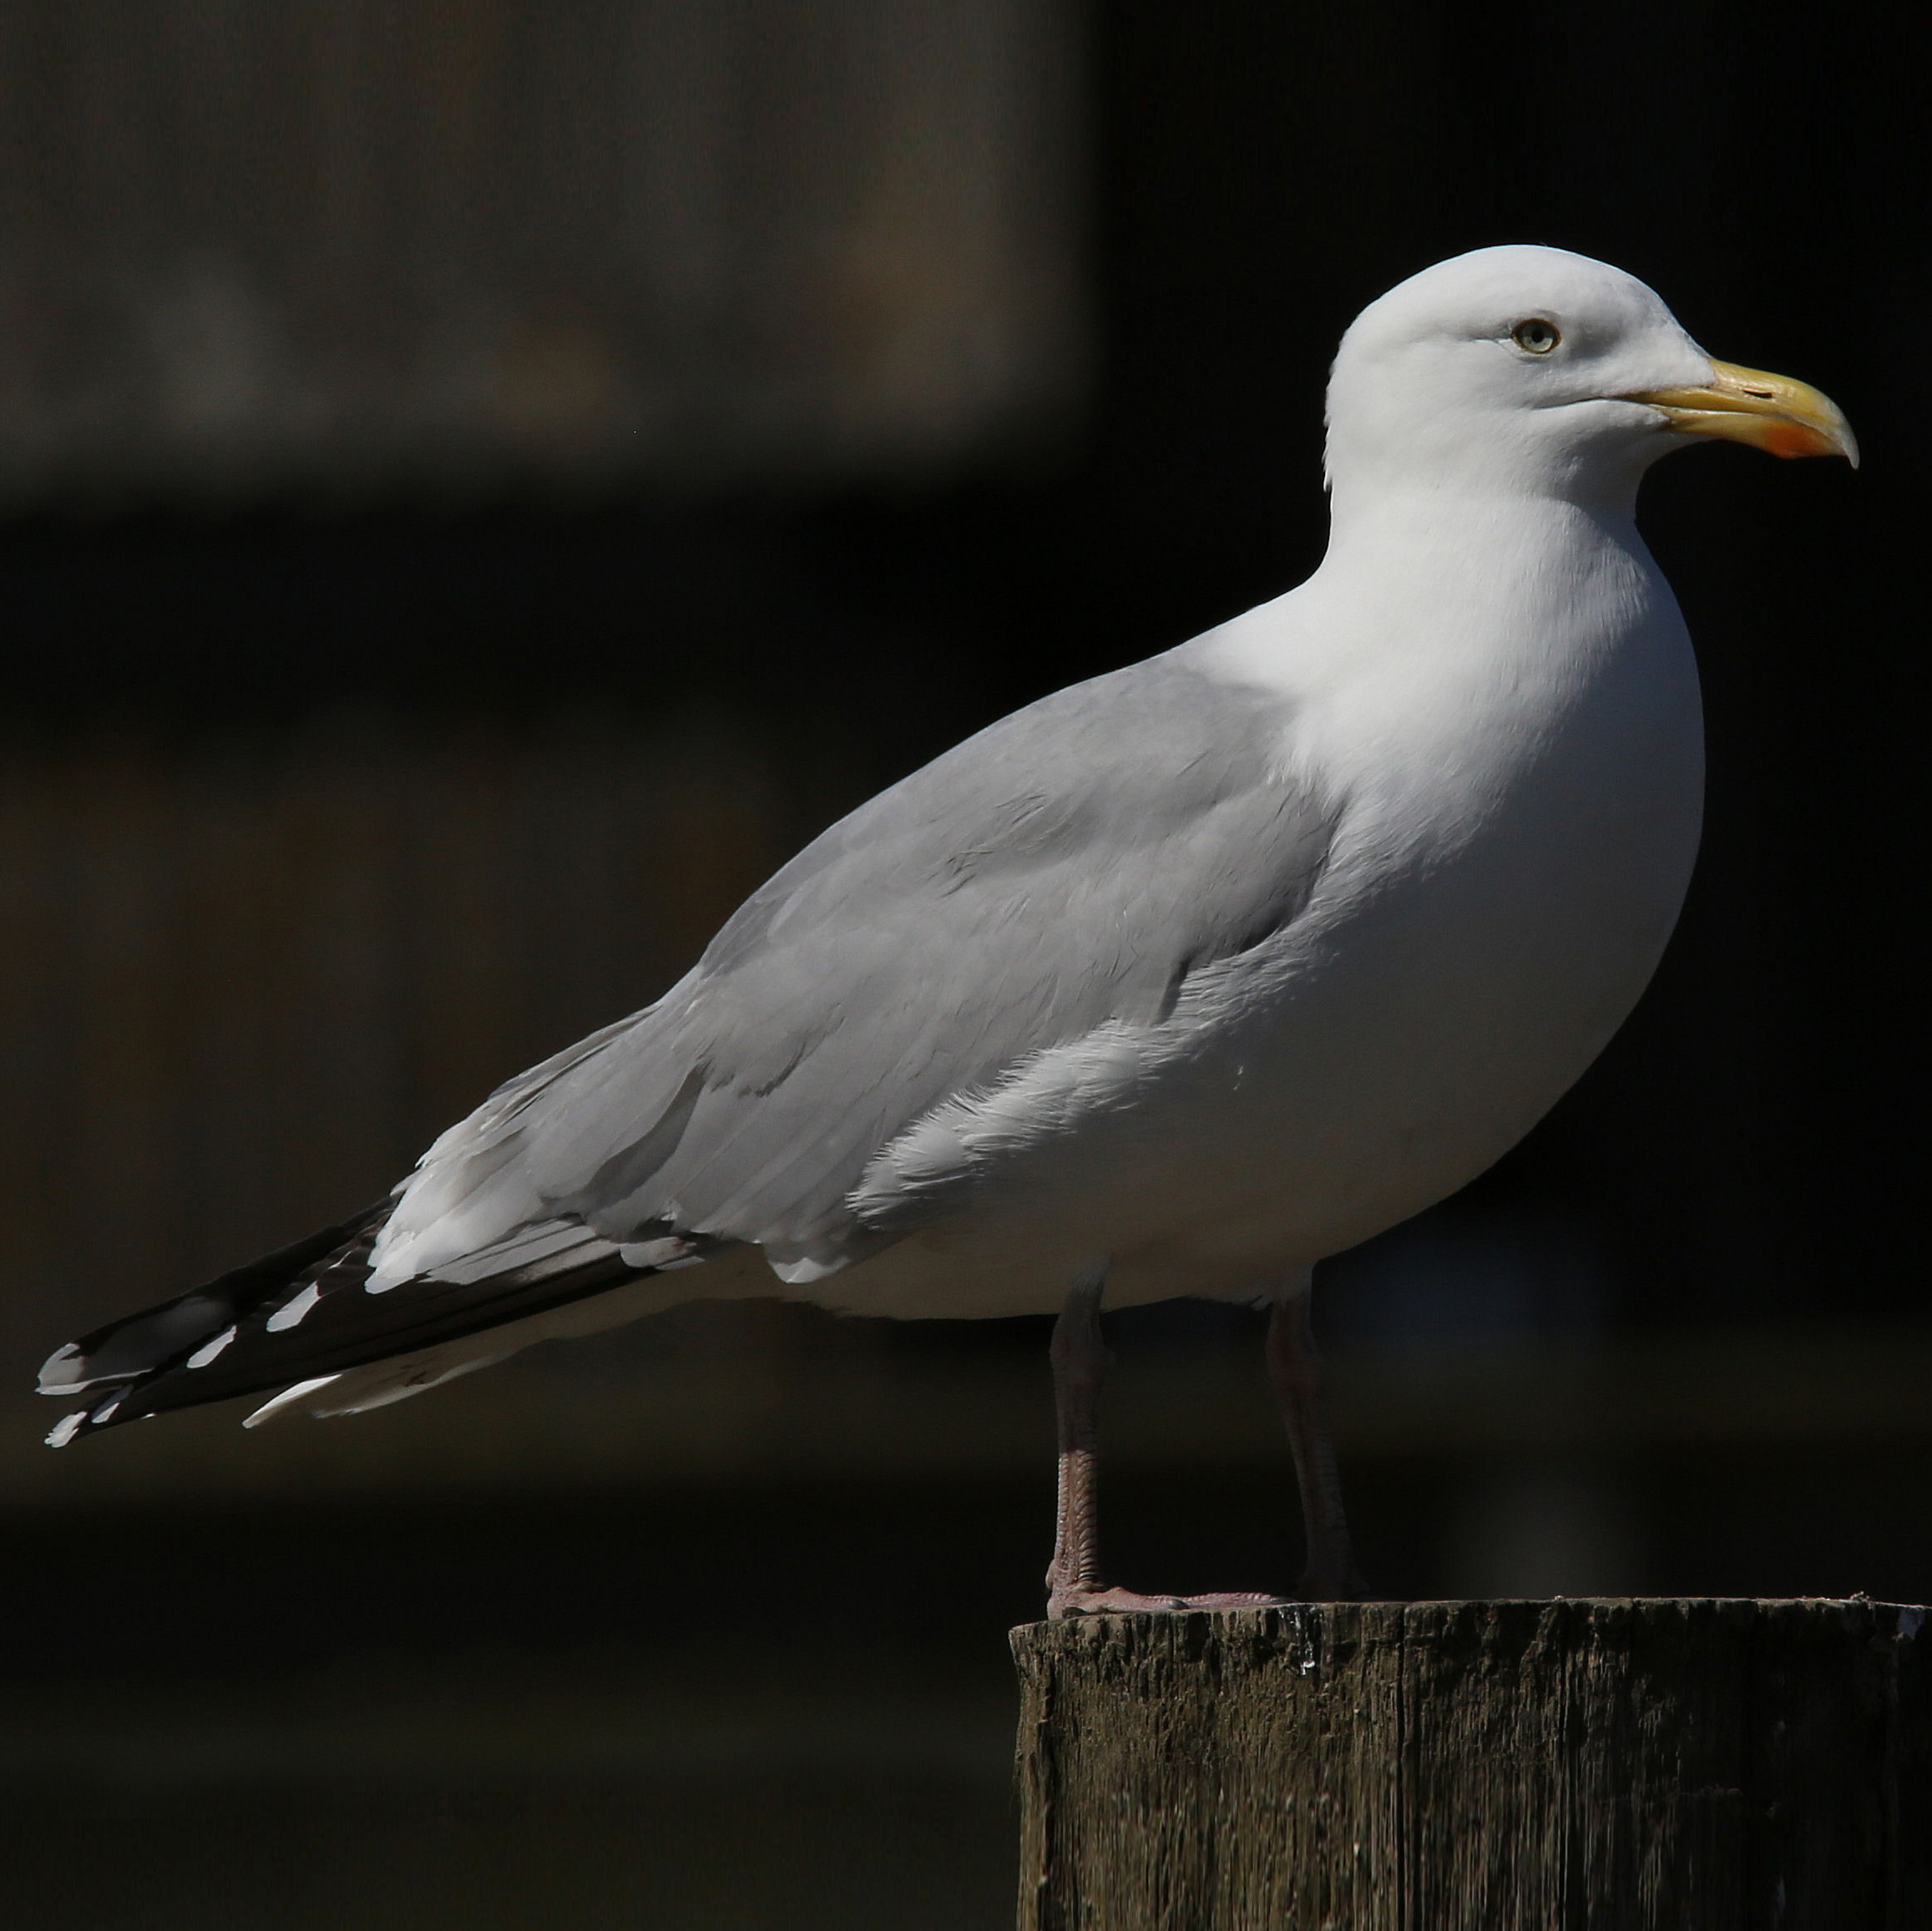 a herring gull perched on a wooden post